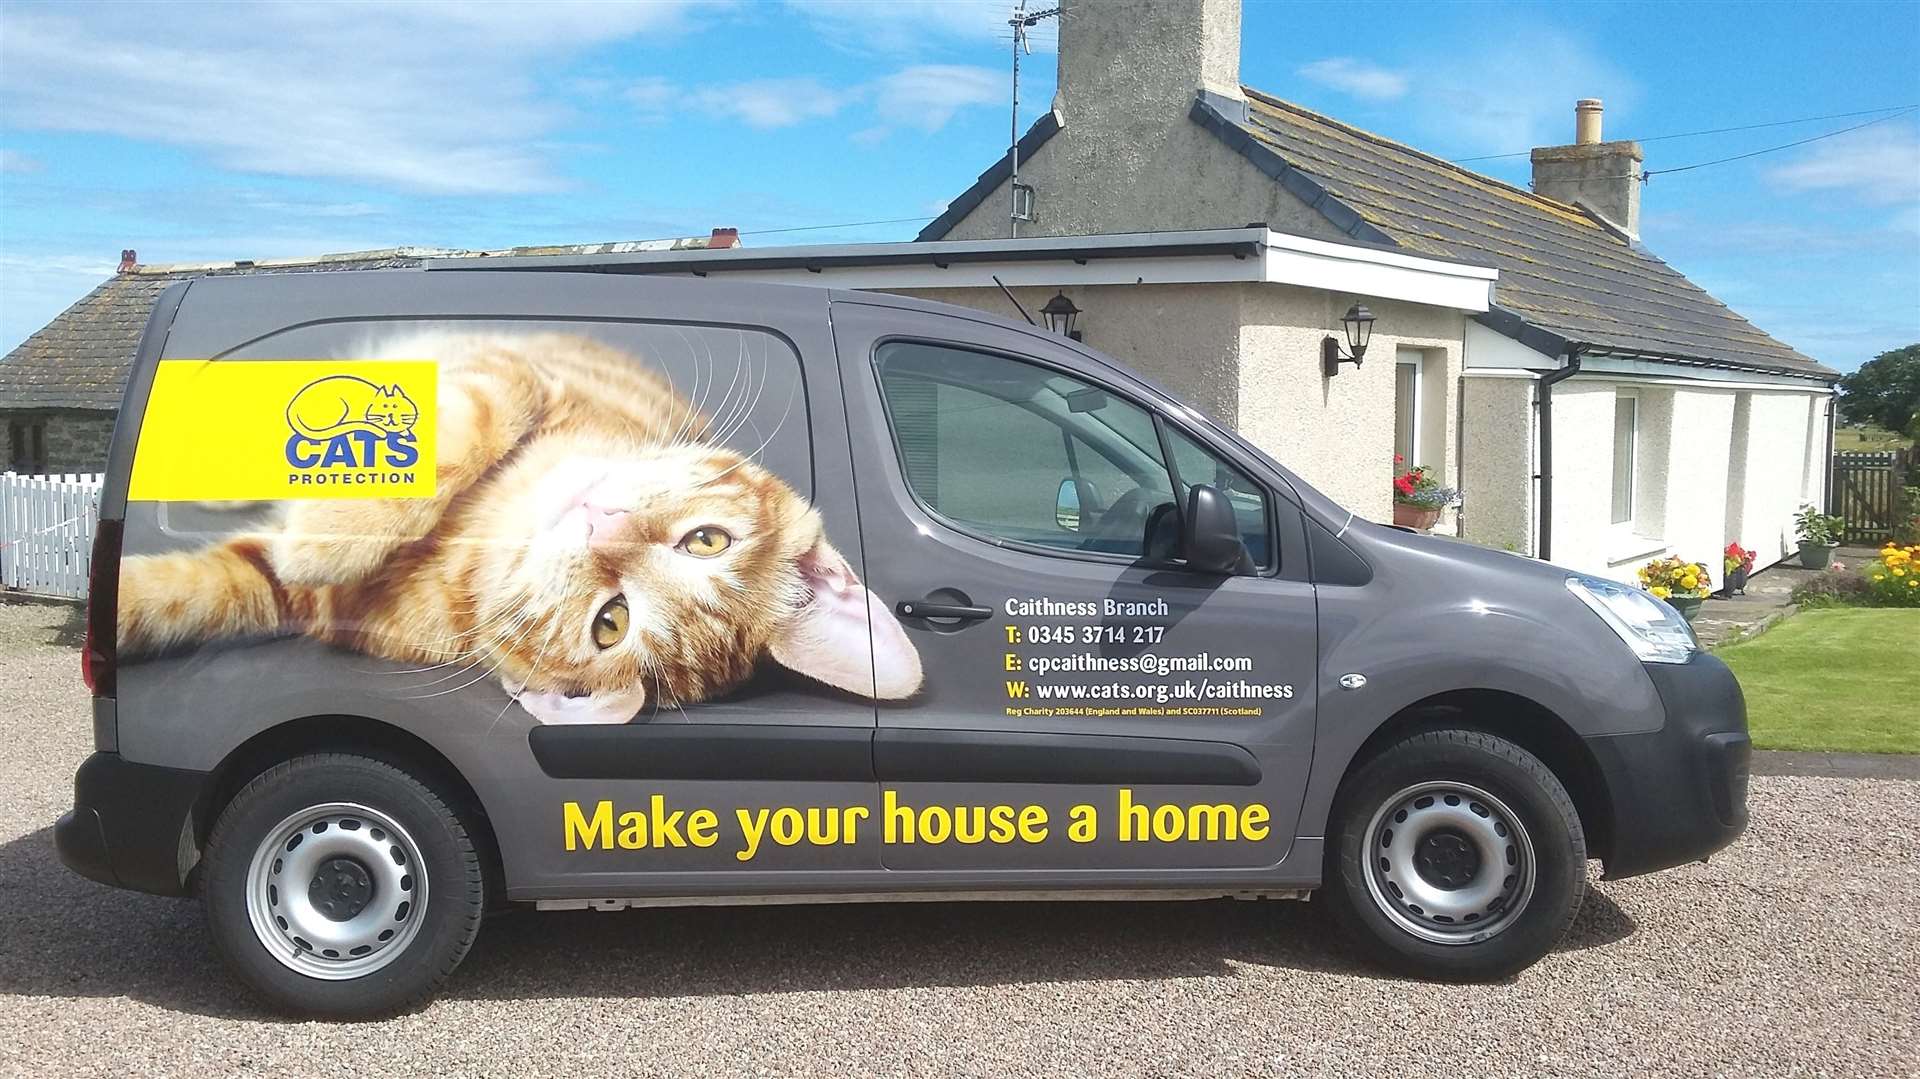 The Cats Protection van for the Caithness branch has been operating in the area since 2017.